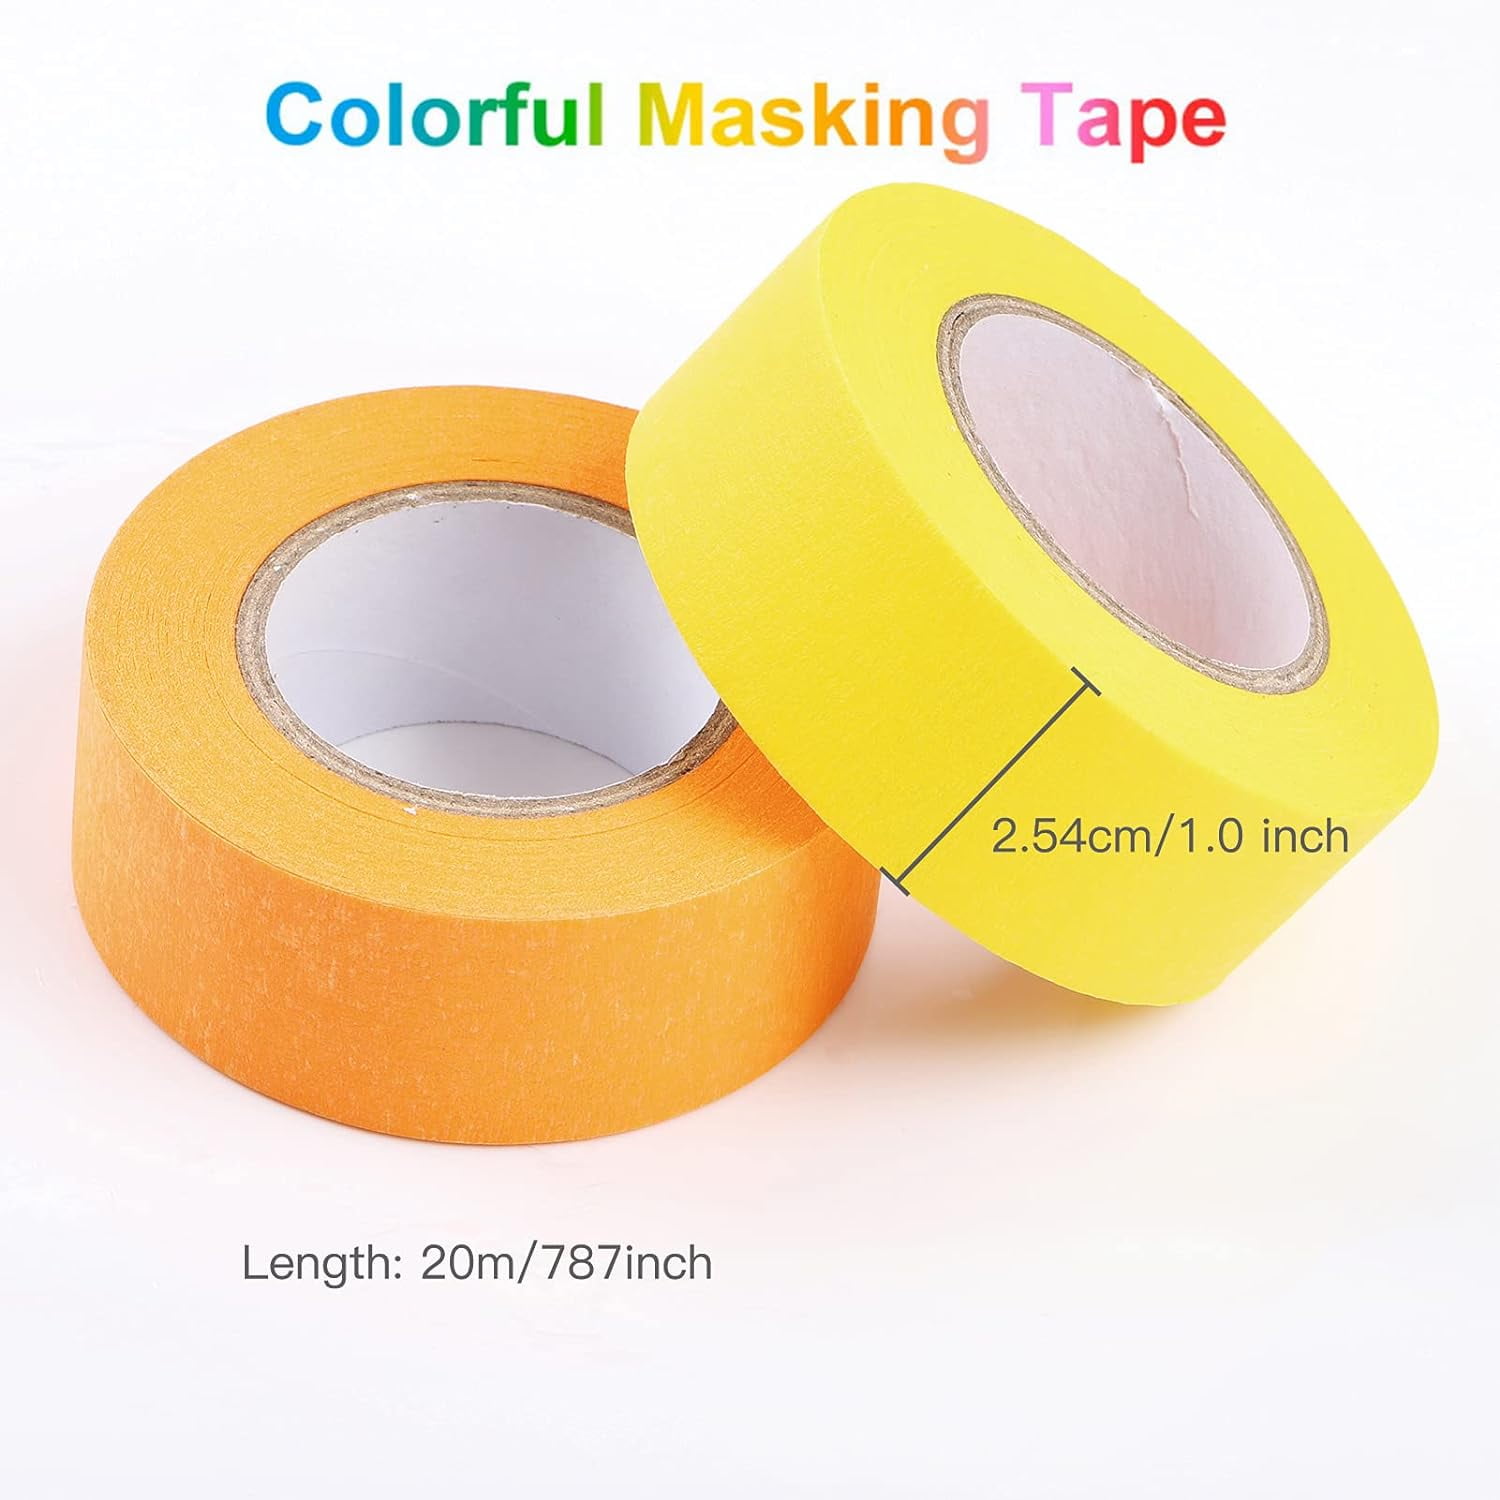 Oleitodh 12 Rolls Colored Masking Tape Painters Tape 2 inch x 360 Yards,  Rainbow Colors Rolls Bulk Kids Colorful Paper Marking Tape Decorative Arts  Crafts Labeling DIY School Classroom Supplies: : Tools